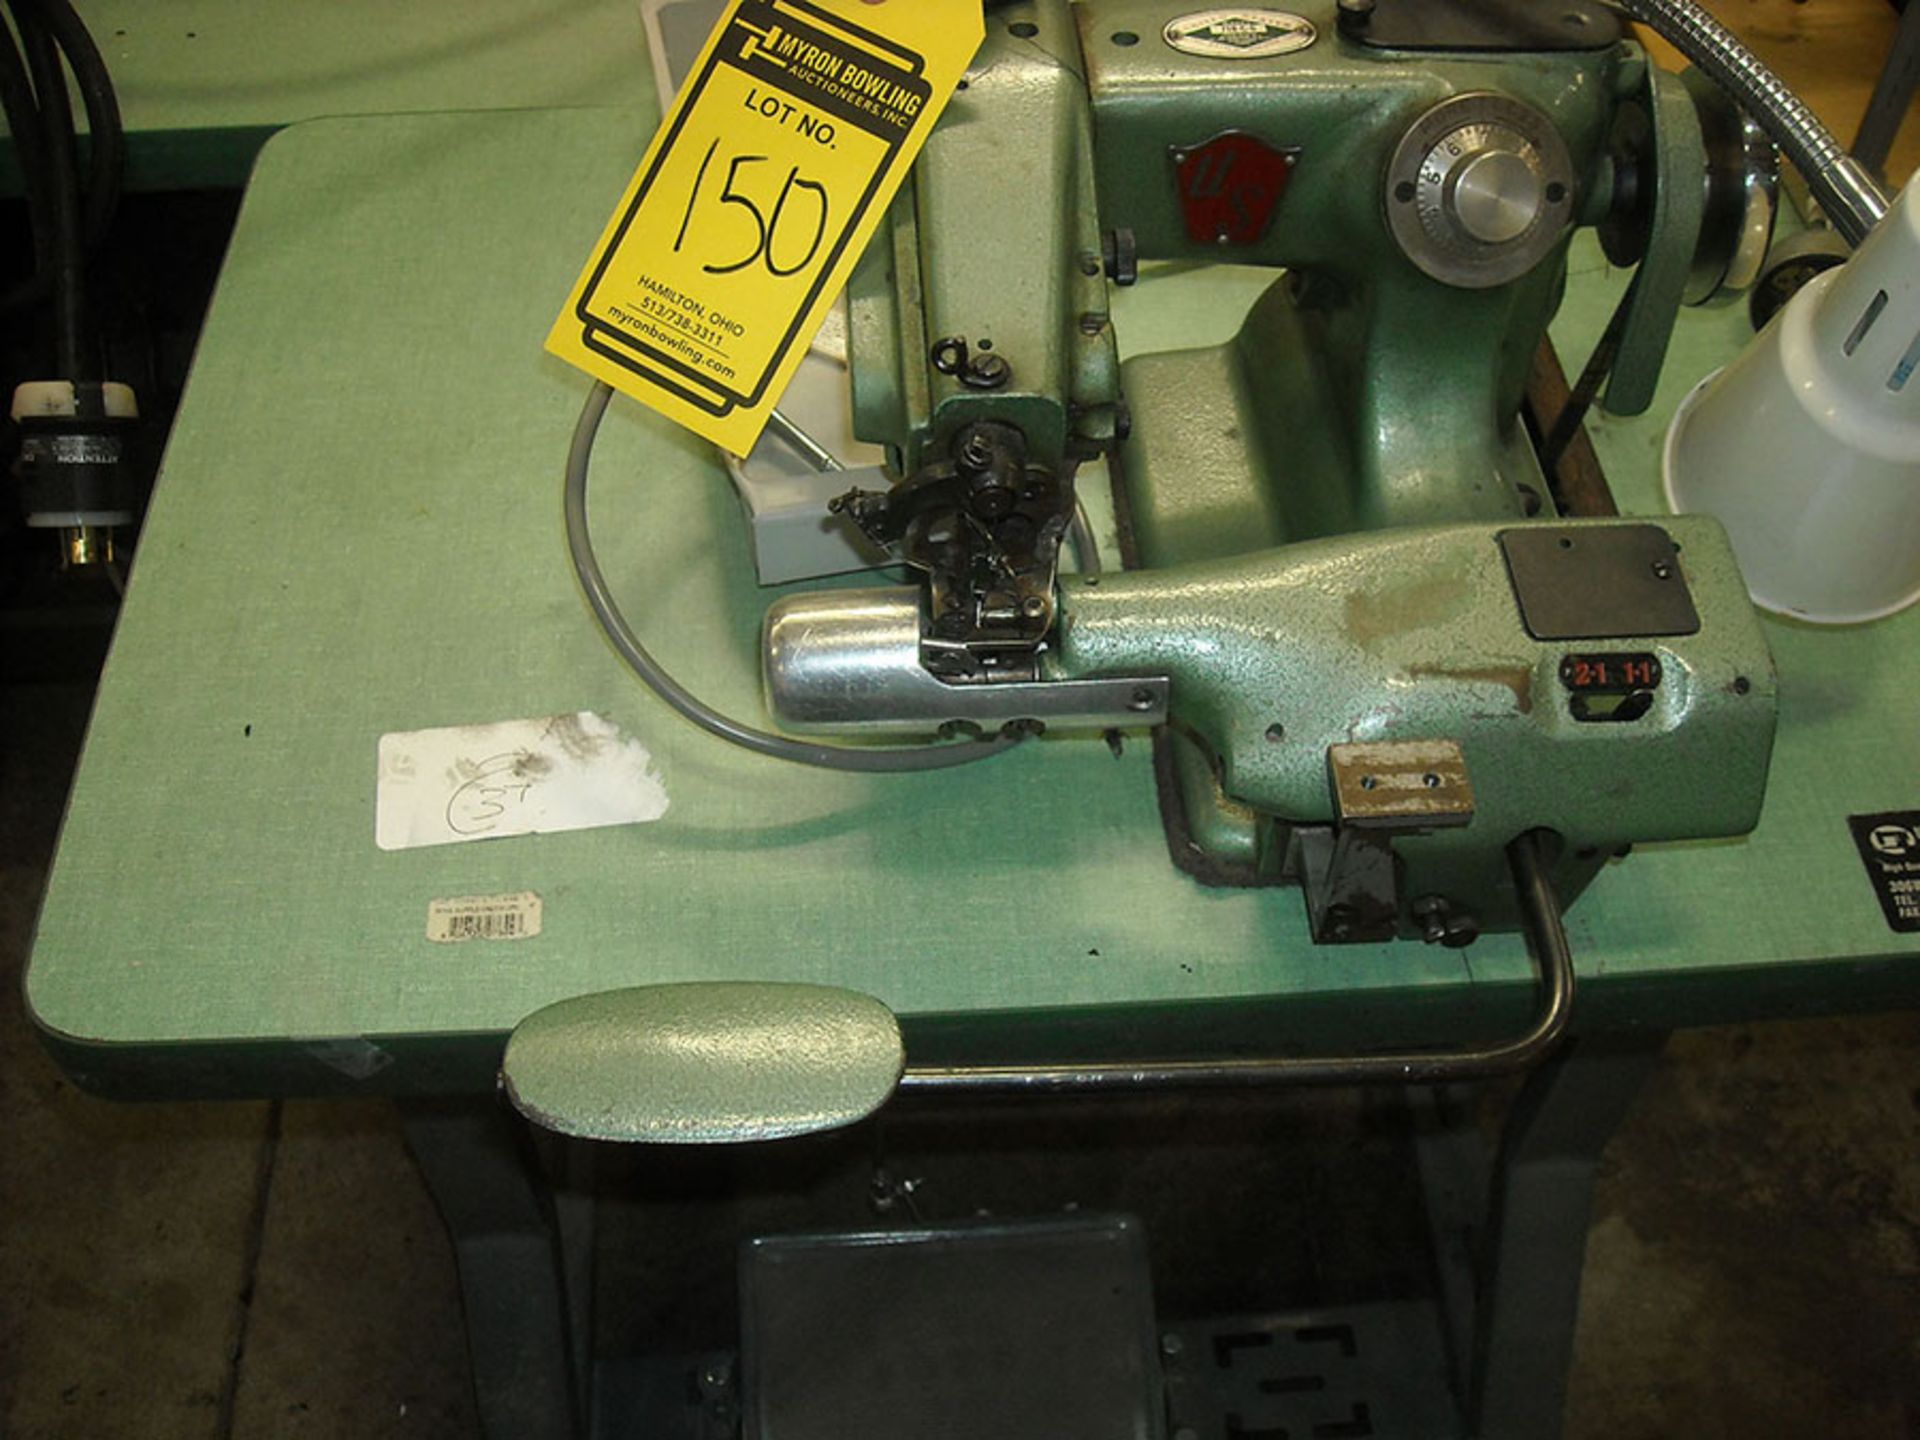 UNITED STATES MODEL 718 C-6 INDUSTRIAL SEWING MACHINE WITH BLIND STITCH